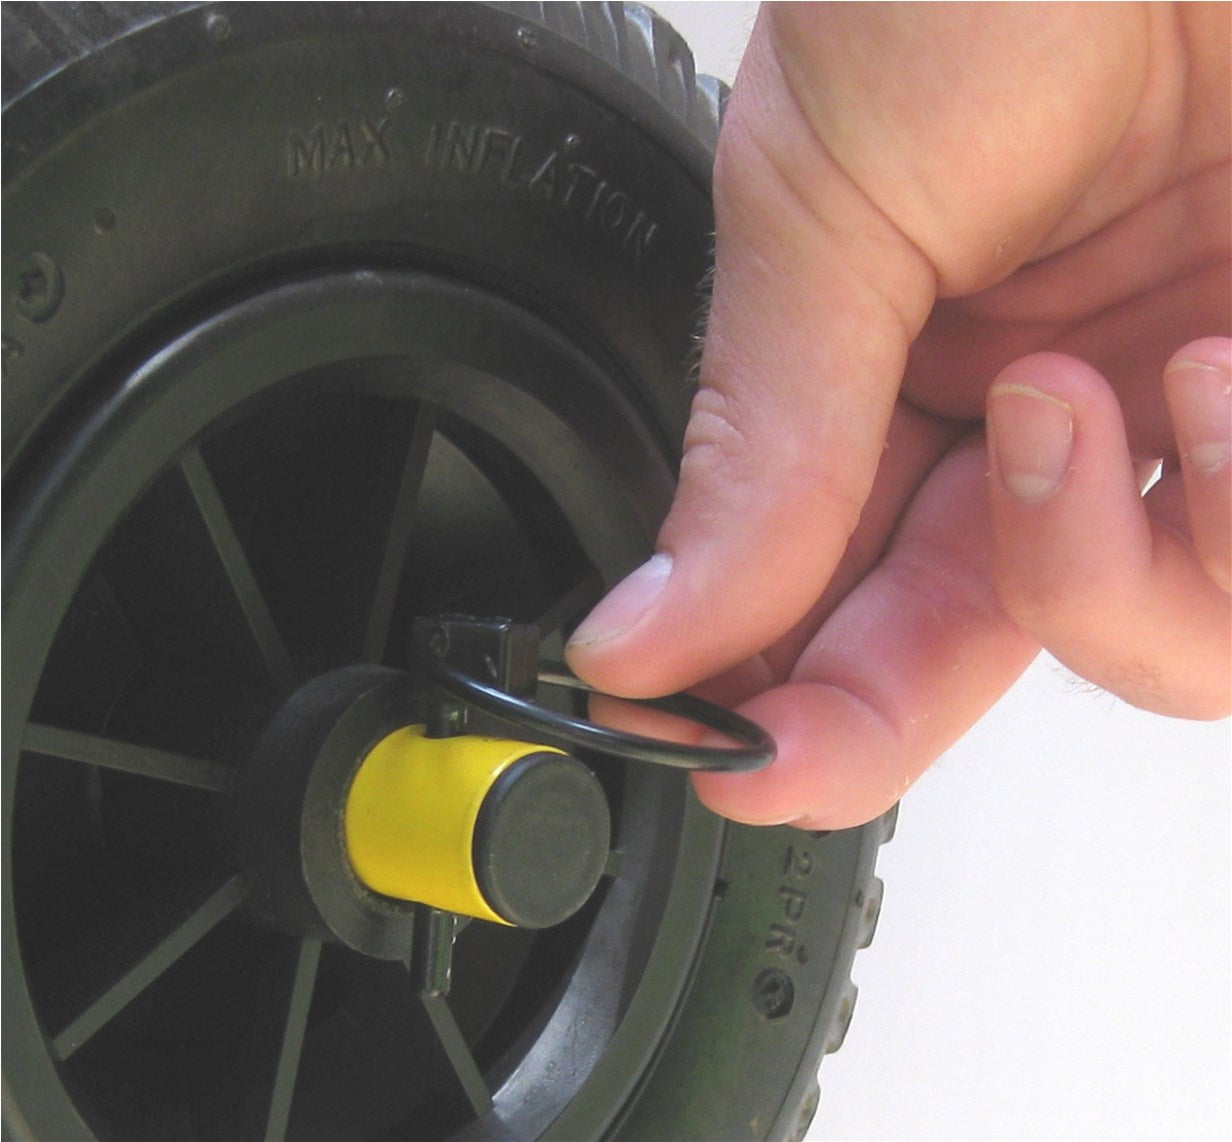 A close up of the quick release tire and pin